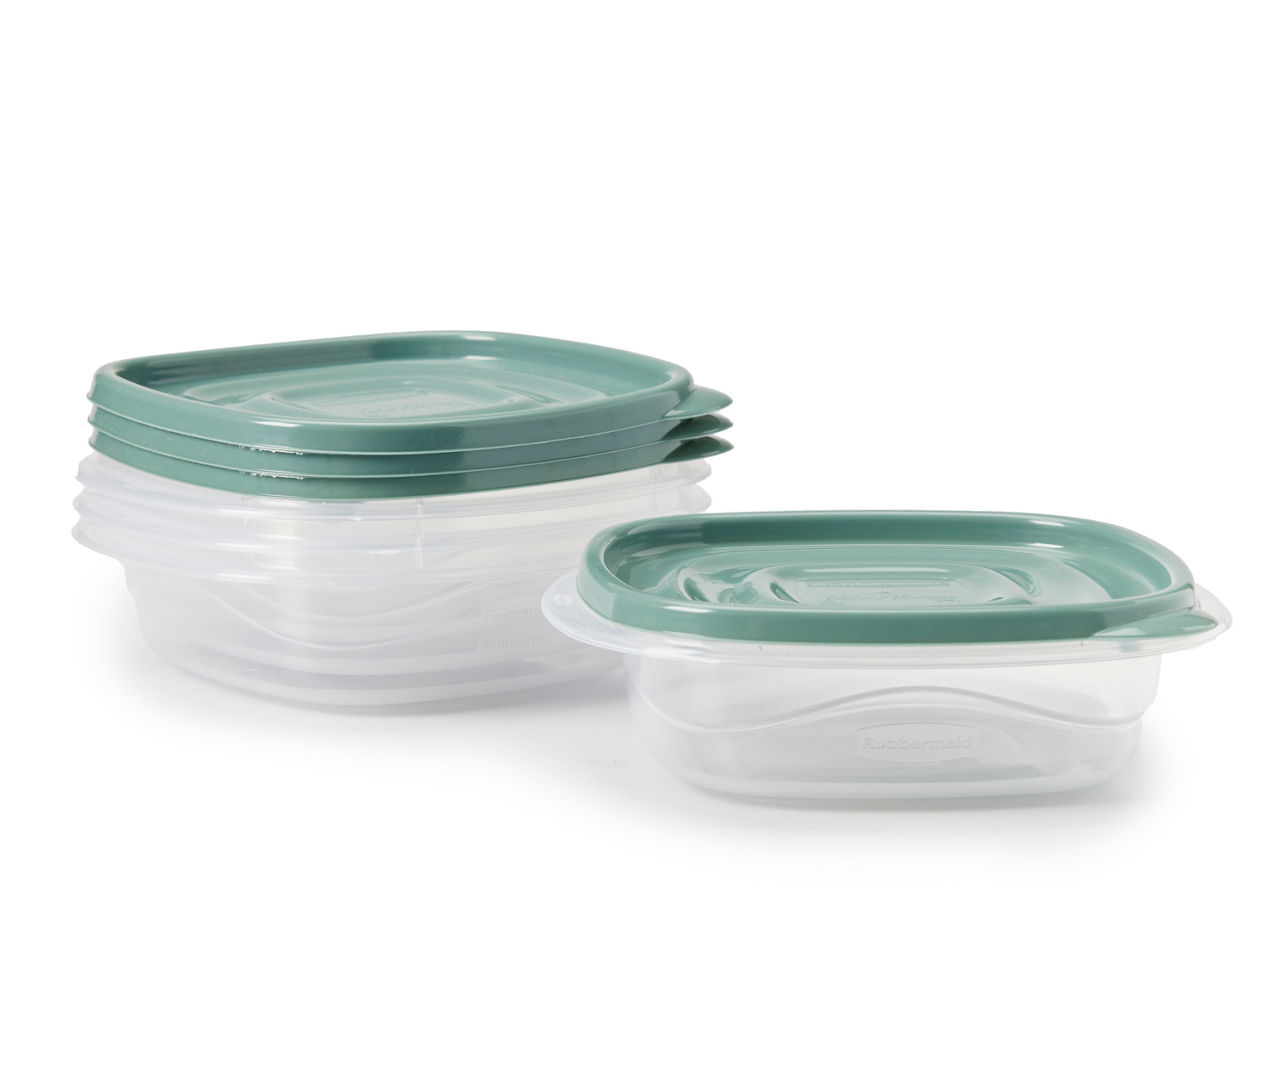 Teal All Purpose Storage Containers, 50-Piece Set